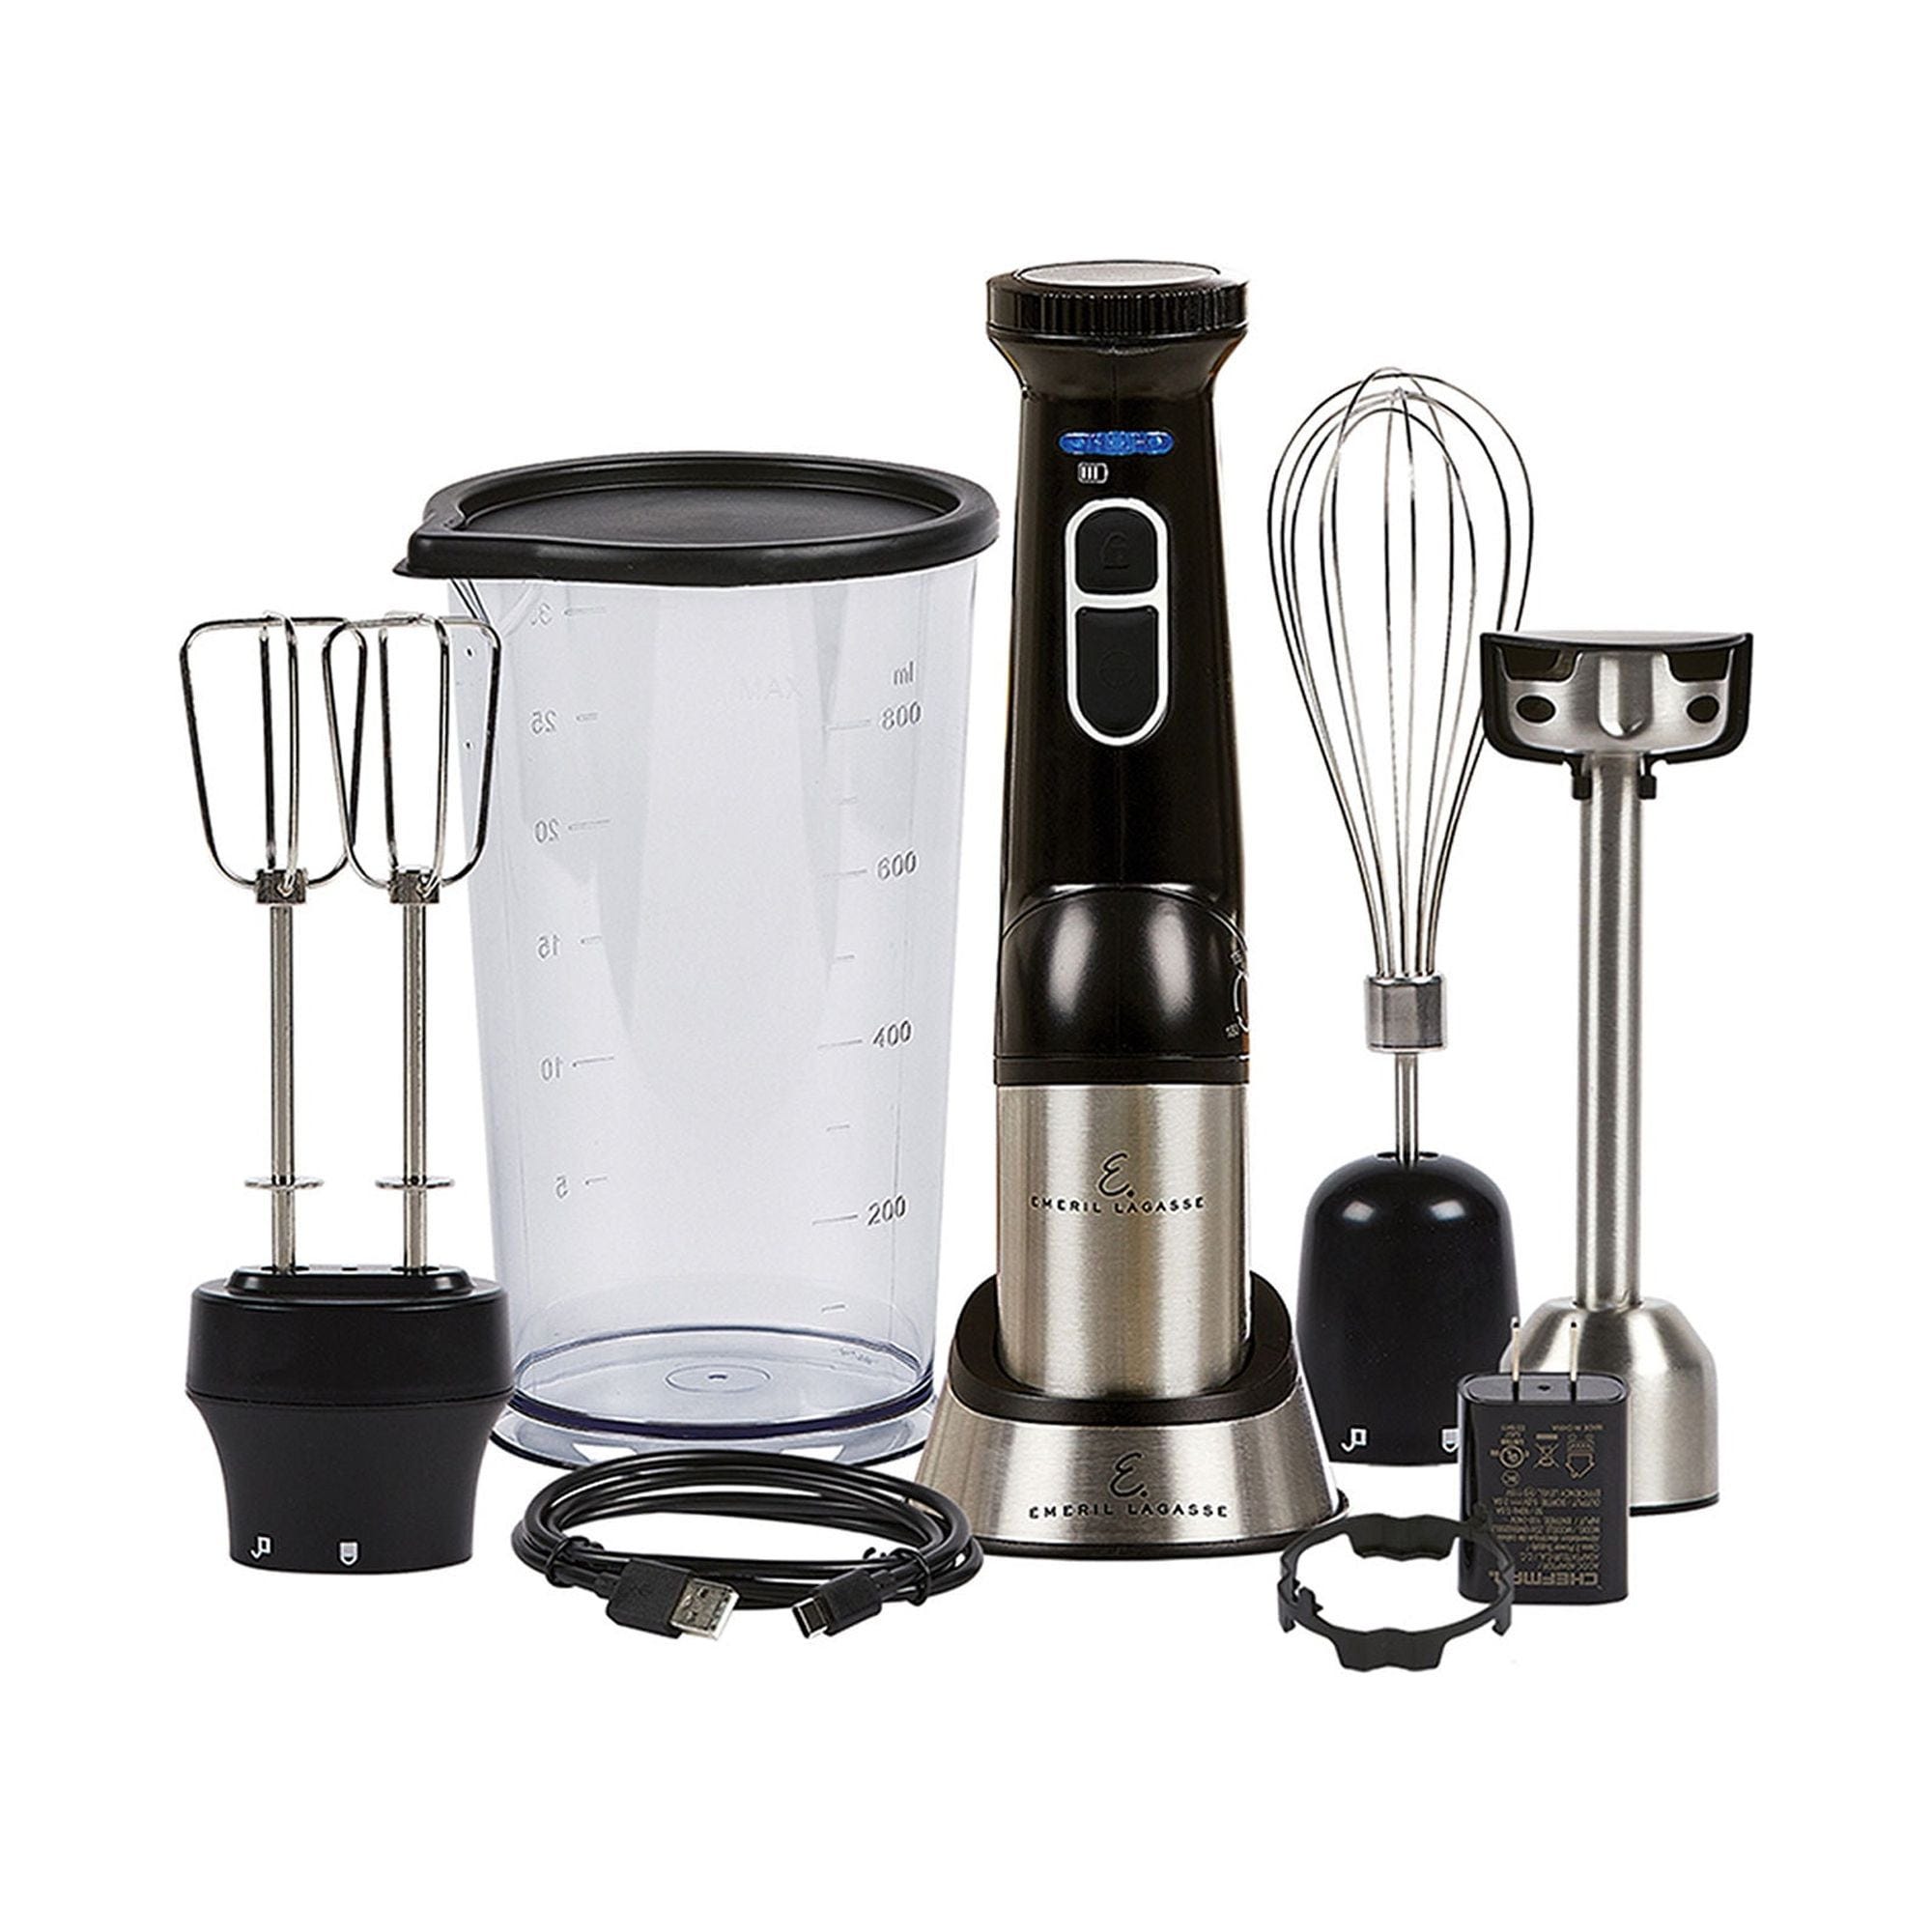 Immersion blender with attachments including a whisk, a chopper, a measuring beaker, and a USB charging cable.